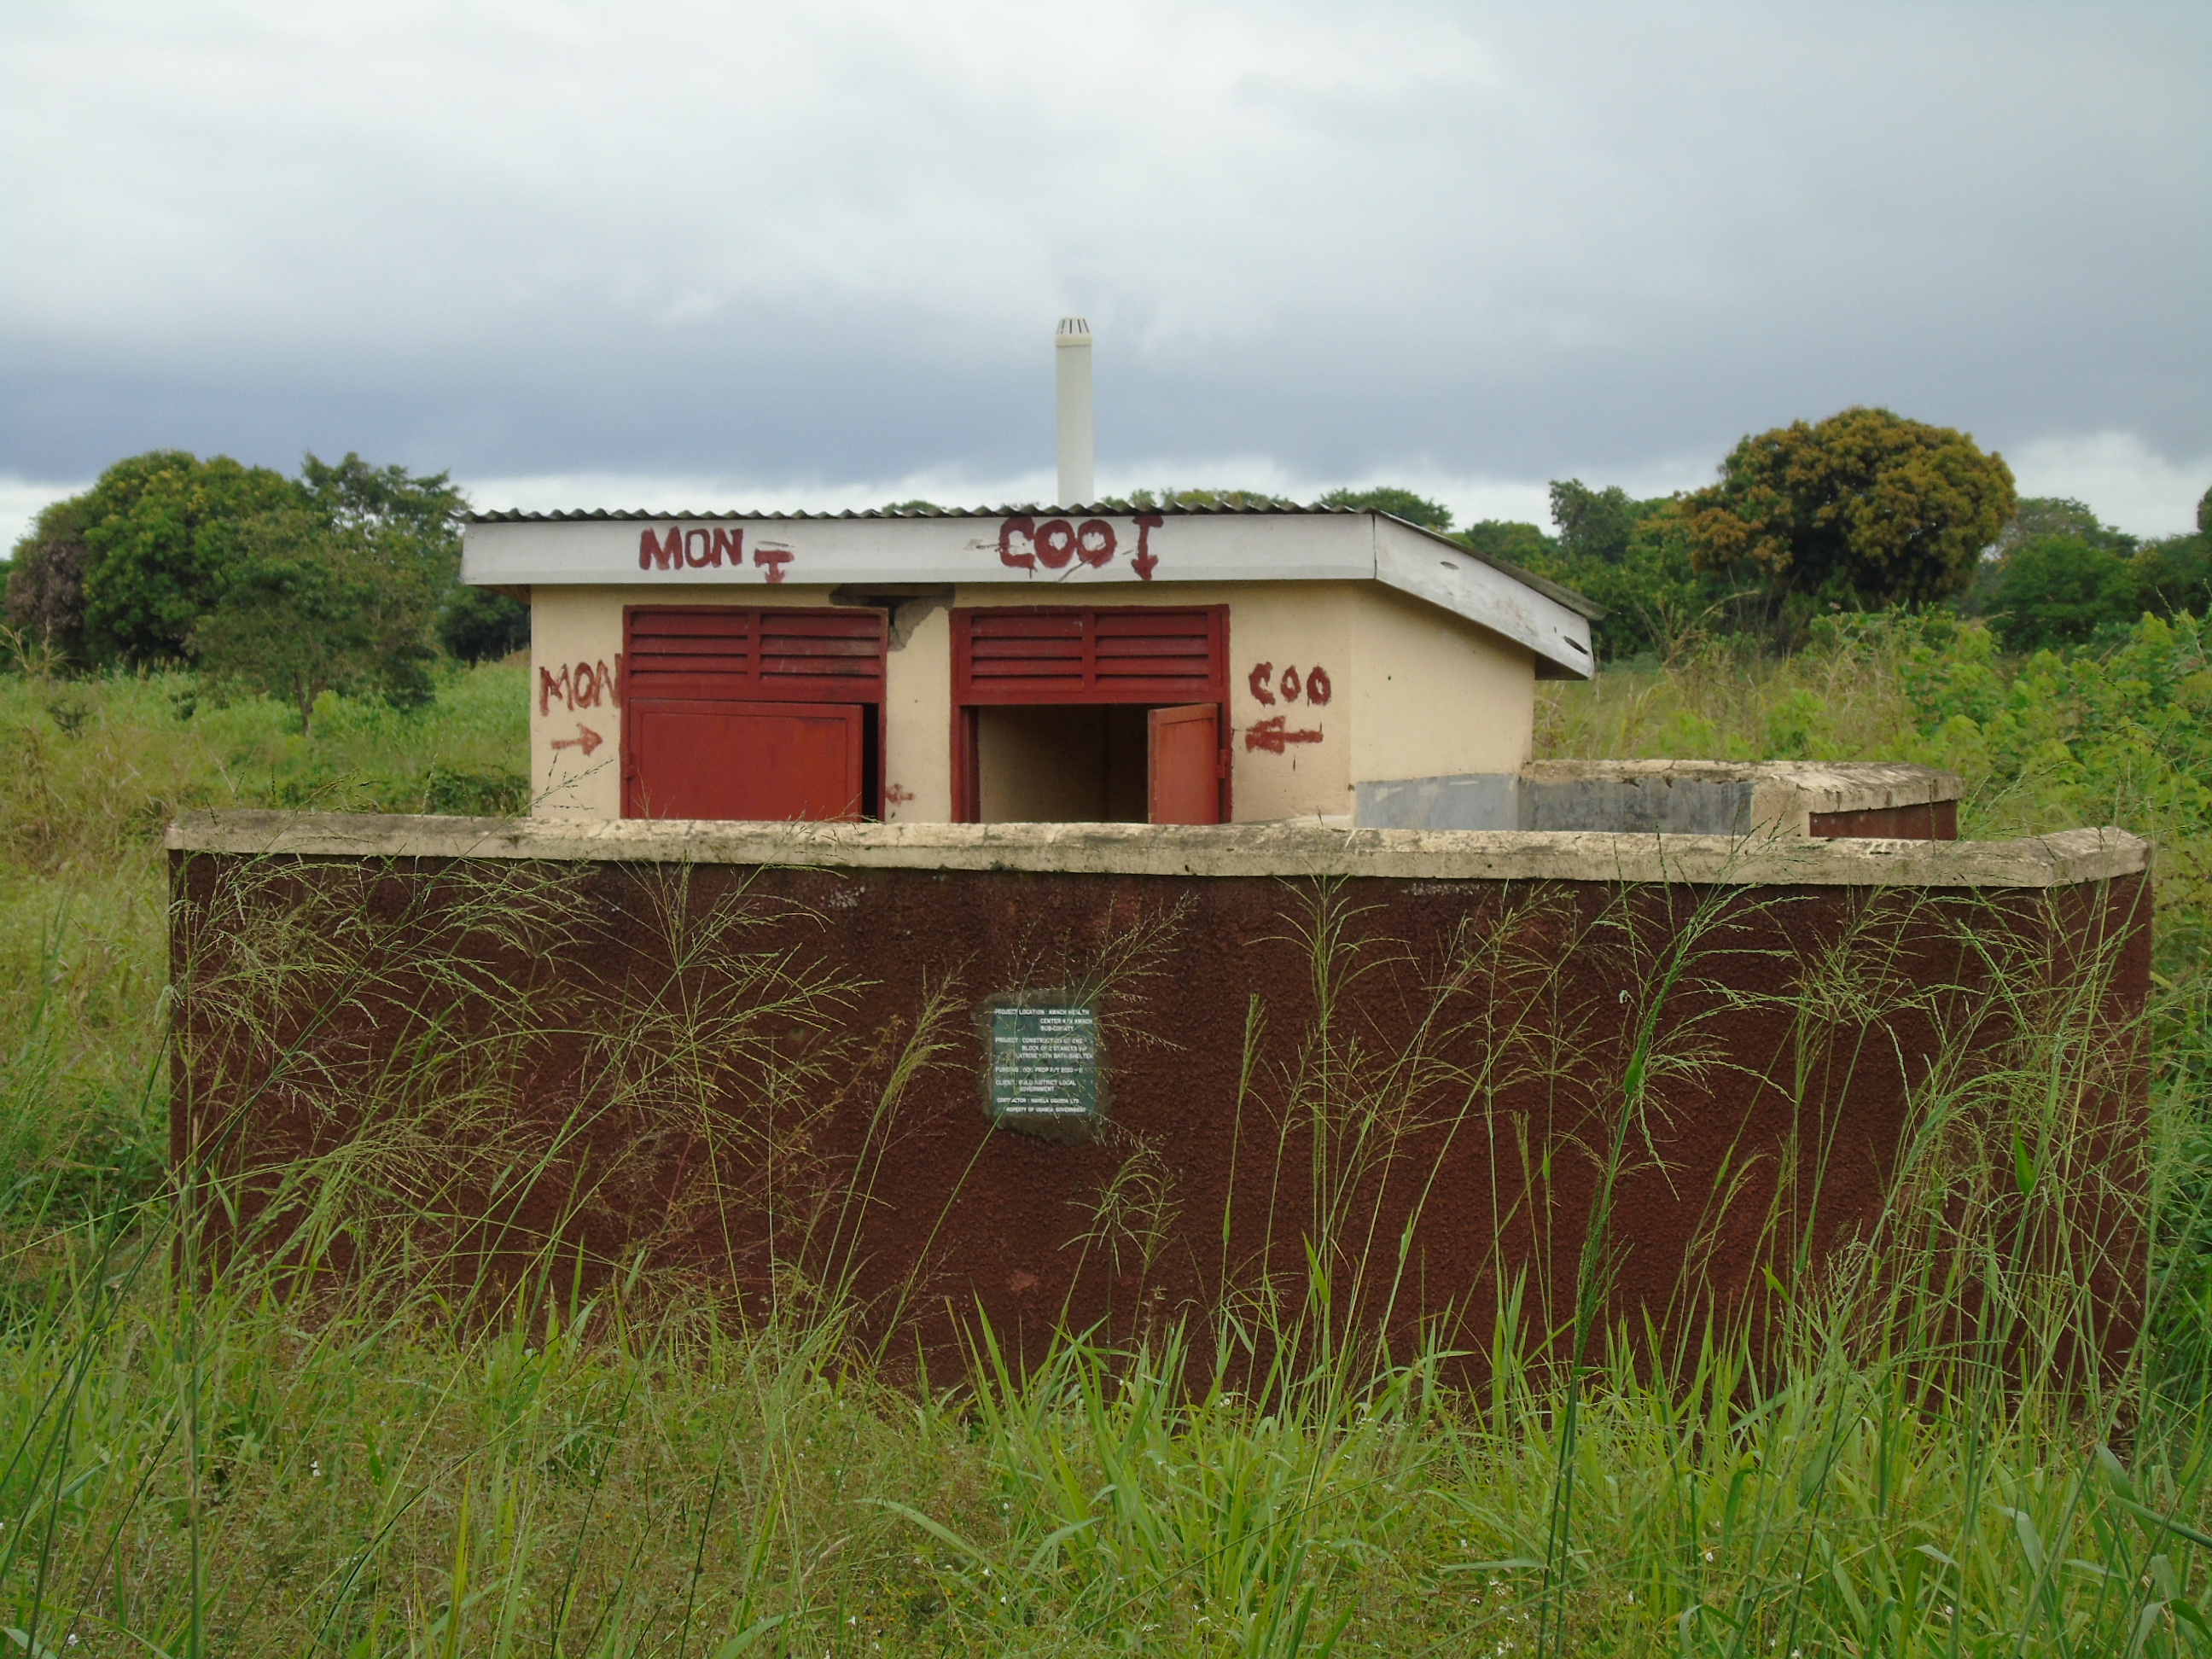 The filled Latrine at the Health centre